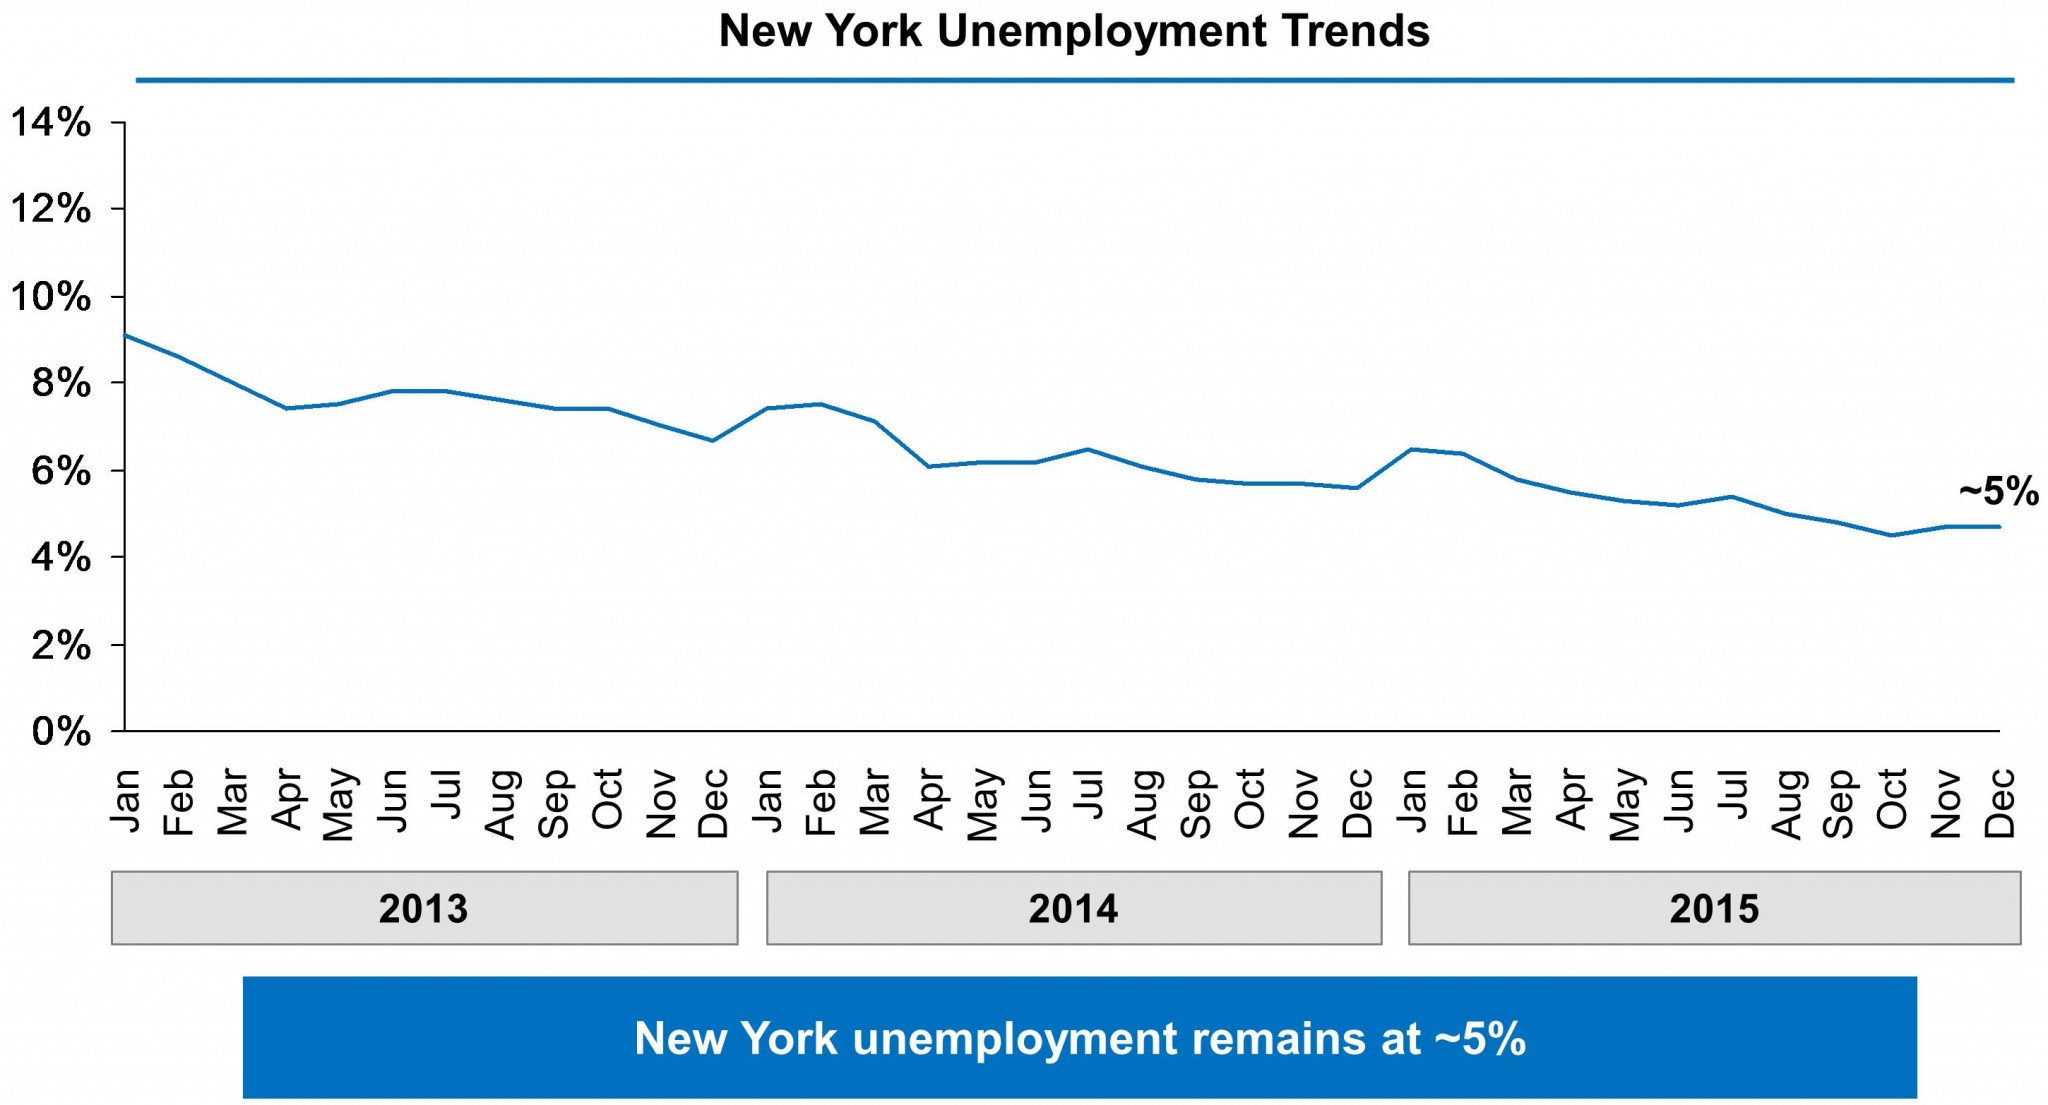 Chart showing New York’s unemployment rate falling from 9% in January 2013 to 4.7% in December 2015.